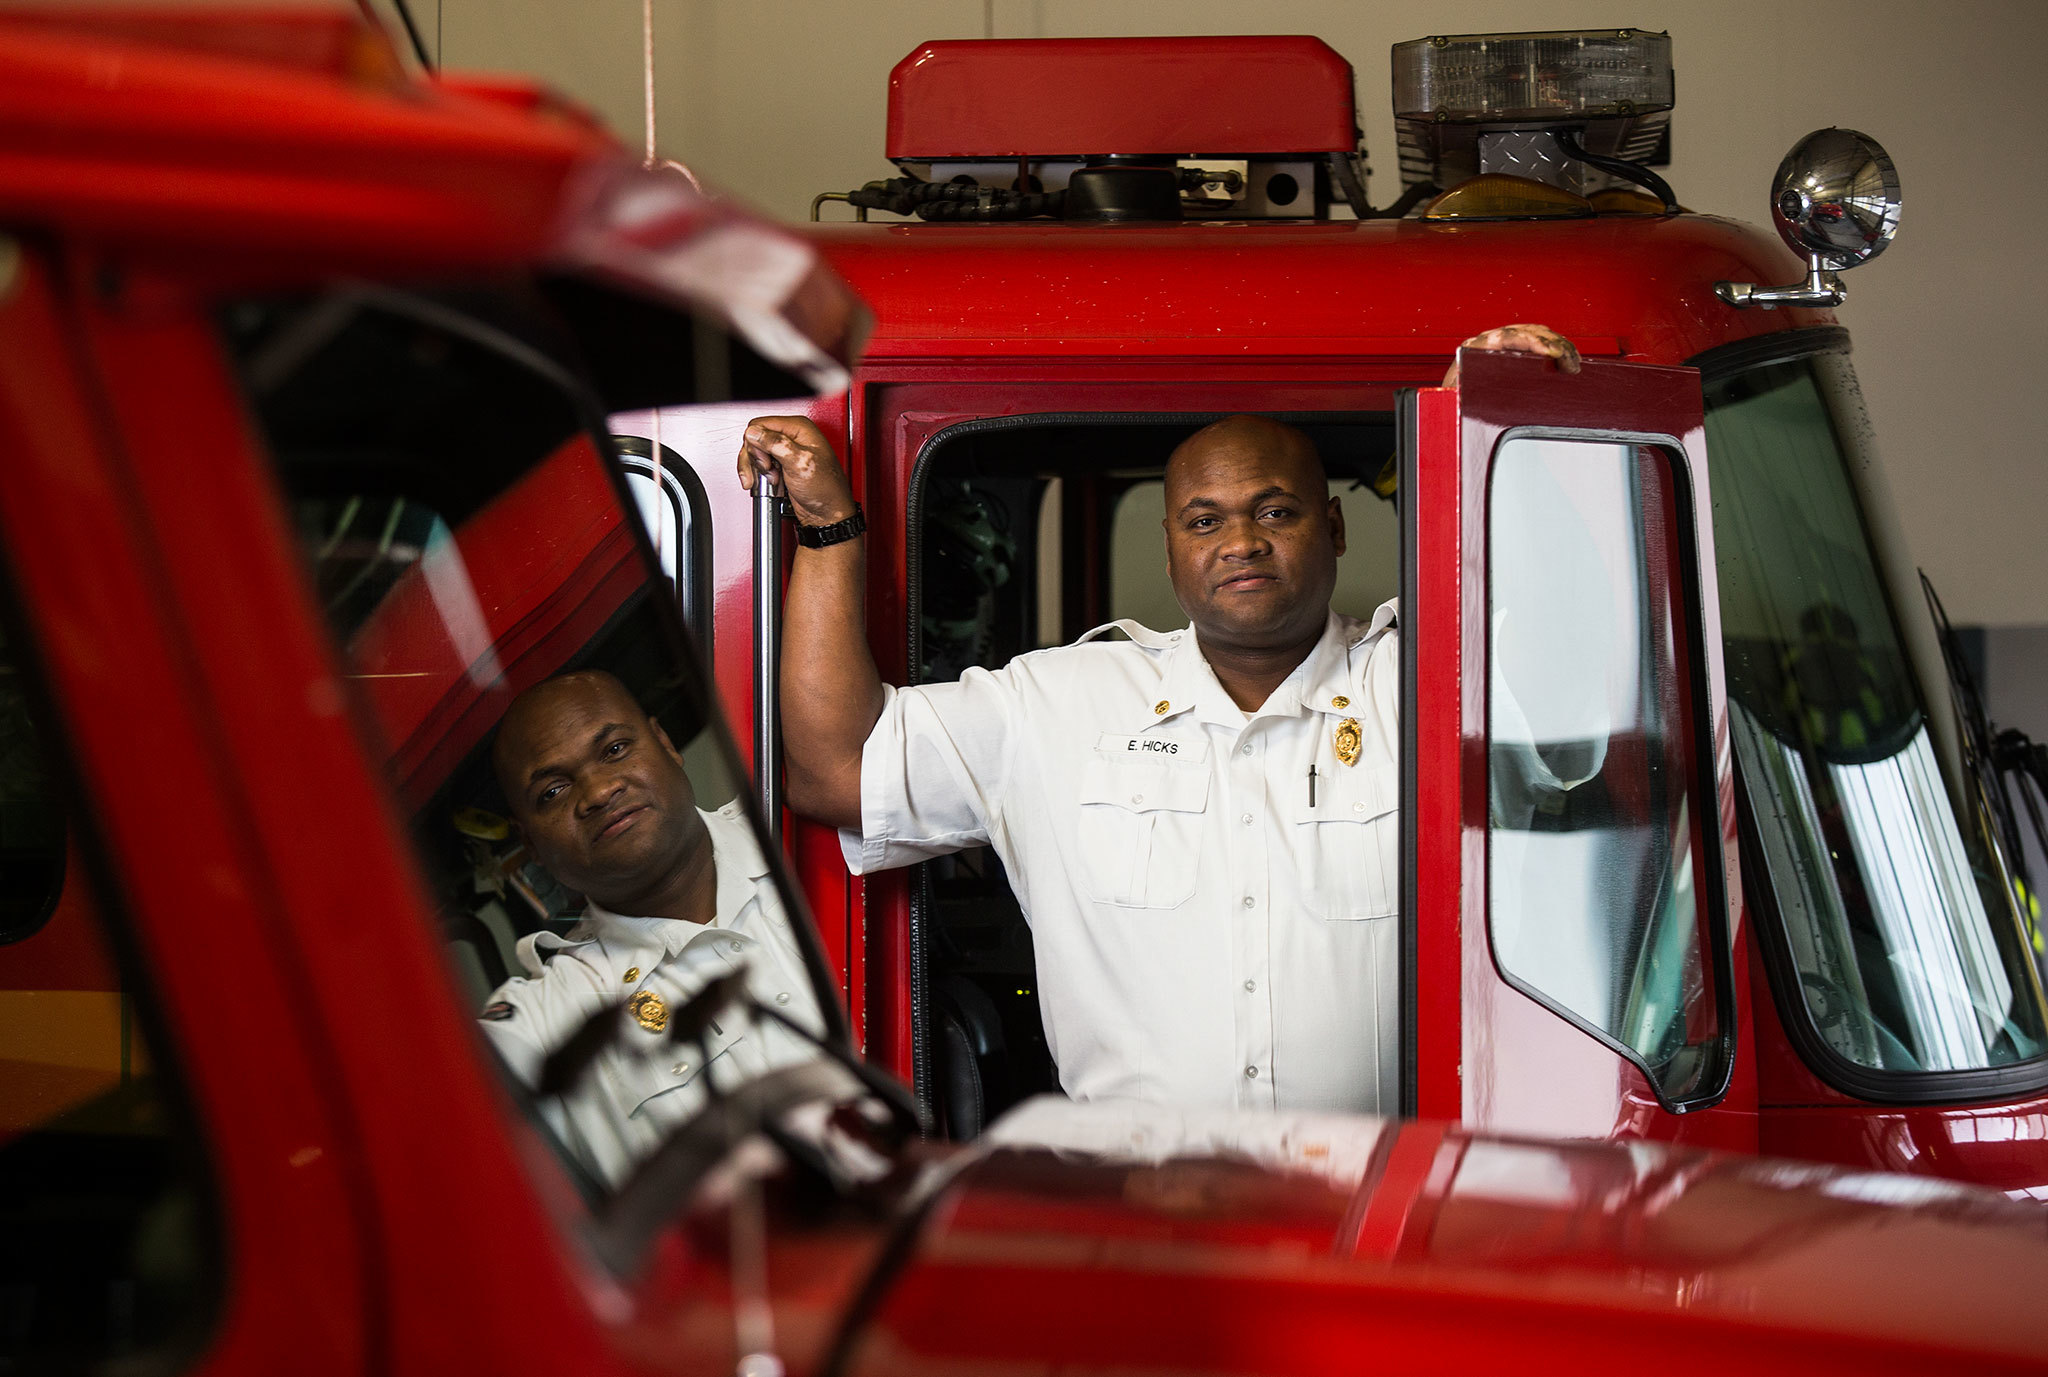 Eric Hicks, the Everett Fire Department’s first African-American fire chief, is leaving to take a job closer to his home in King County. (Andy Bronson / The Herald)